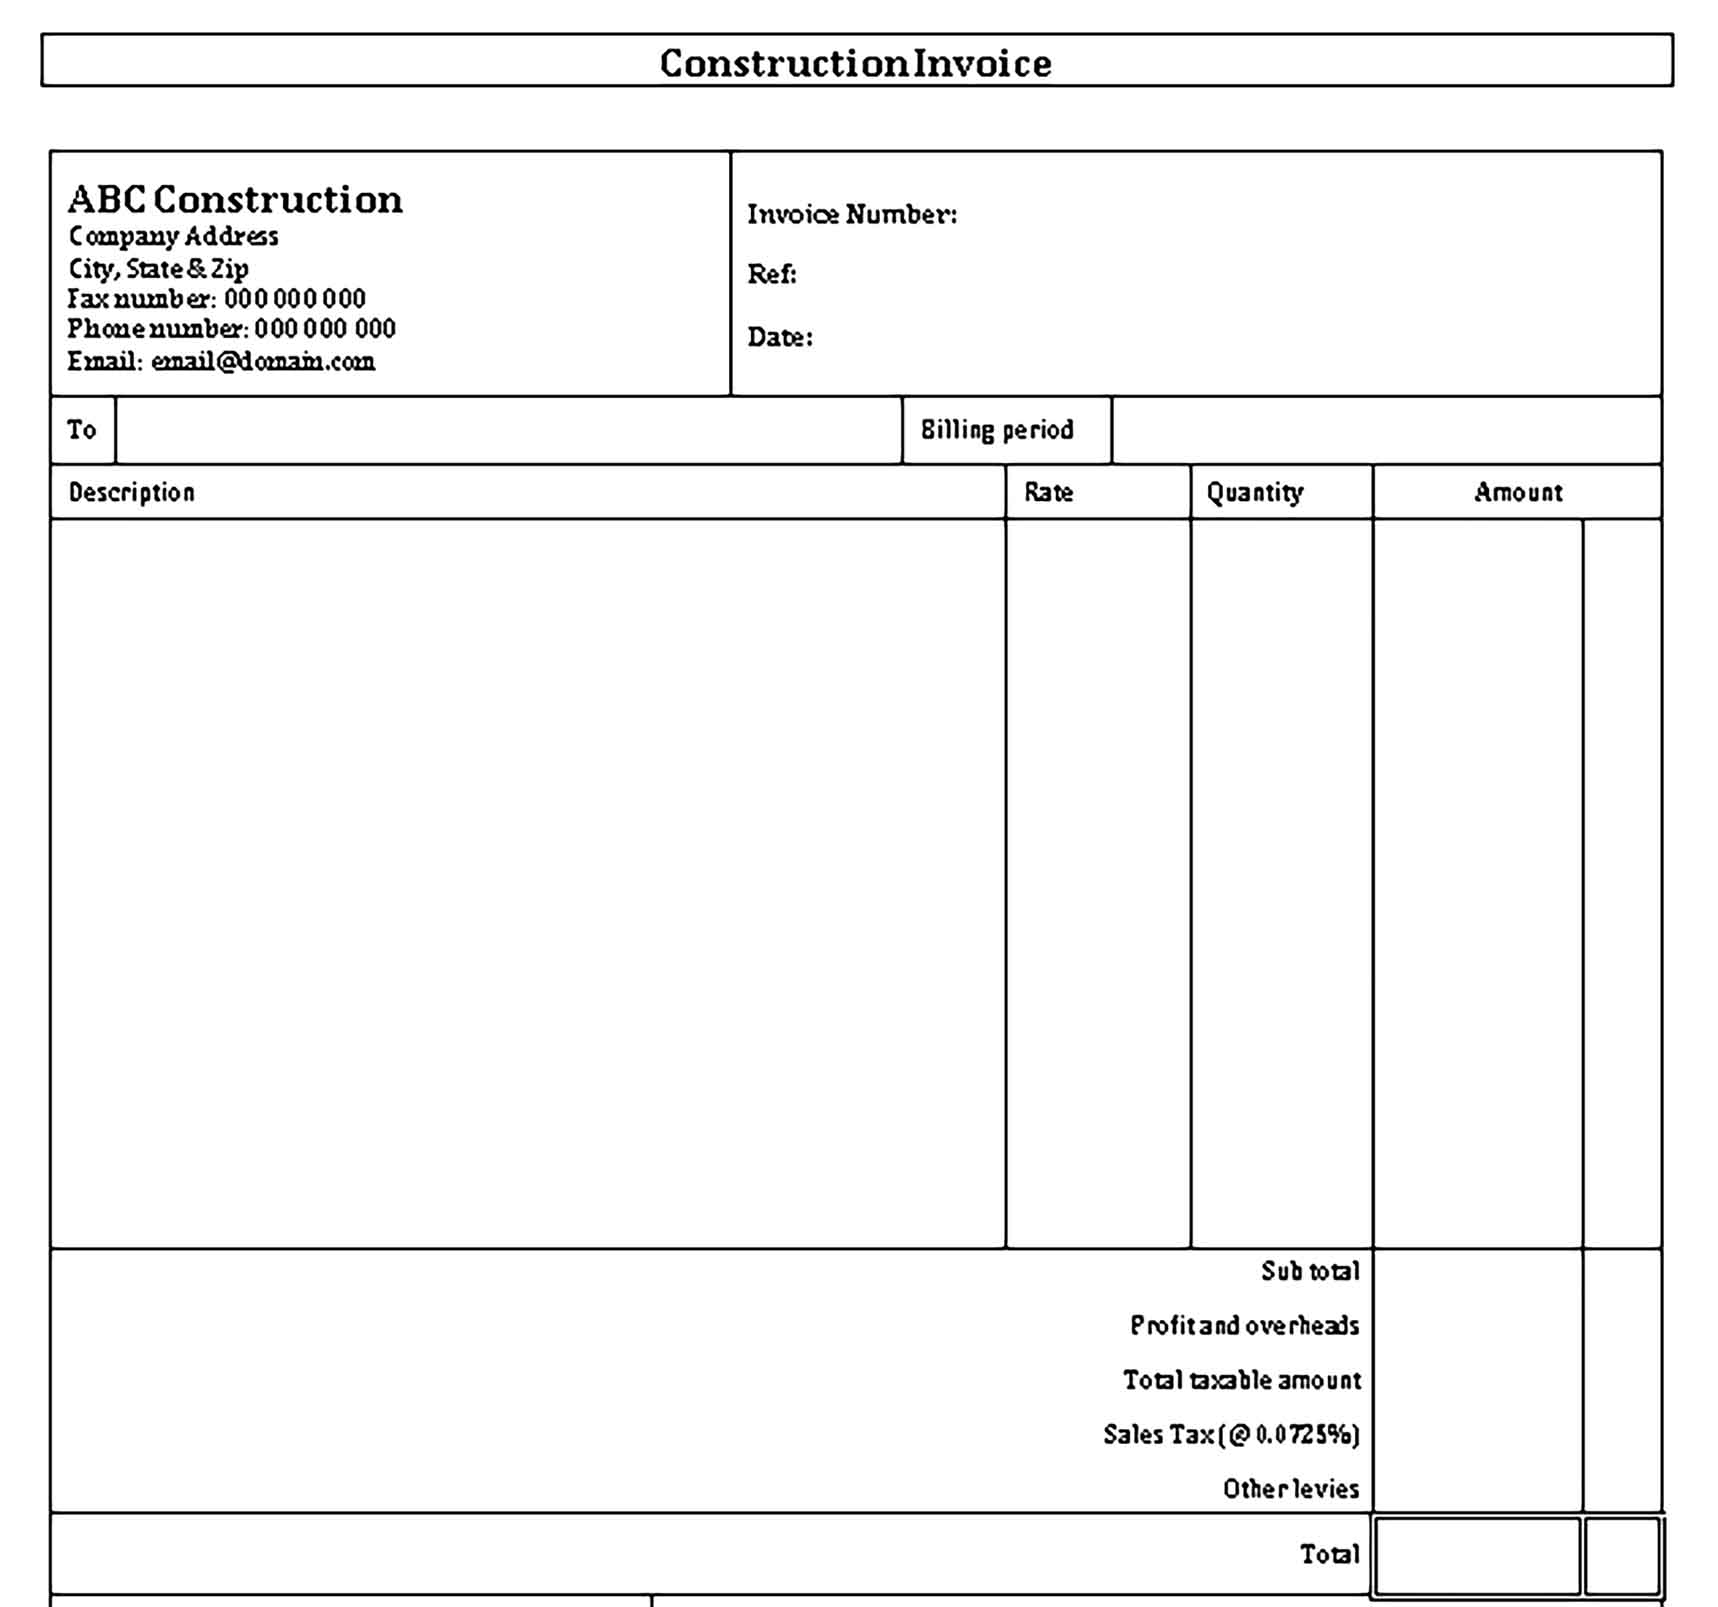 Sample Templates Self Employed Construction Invoice